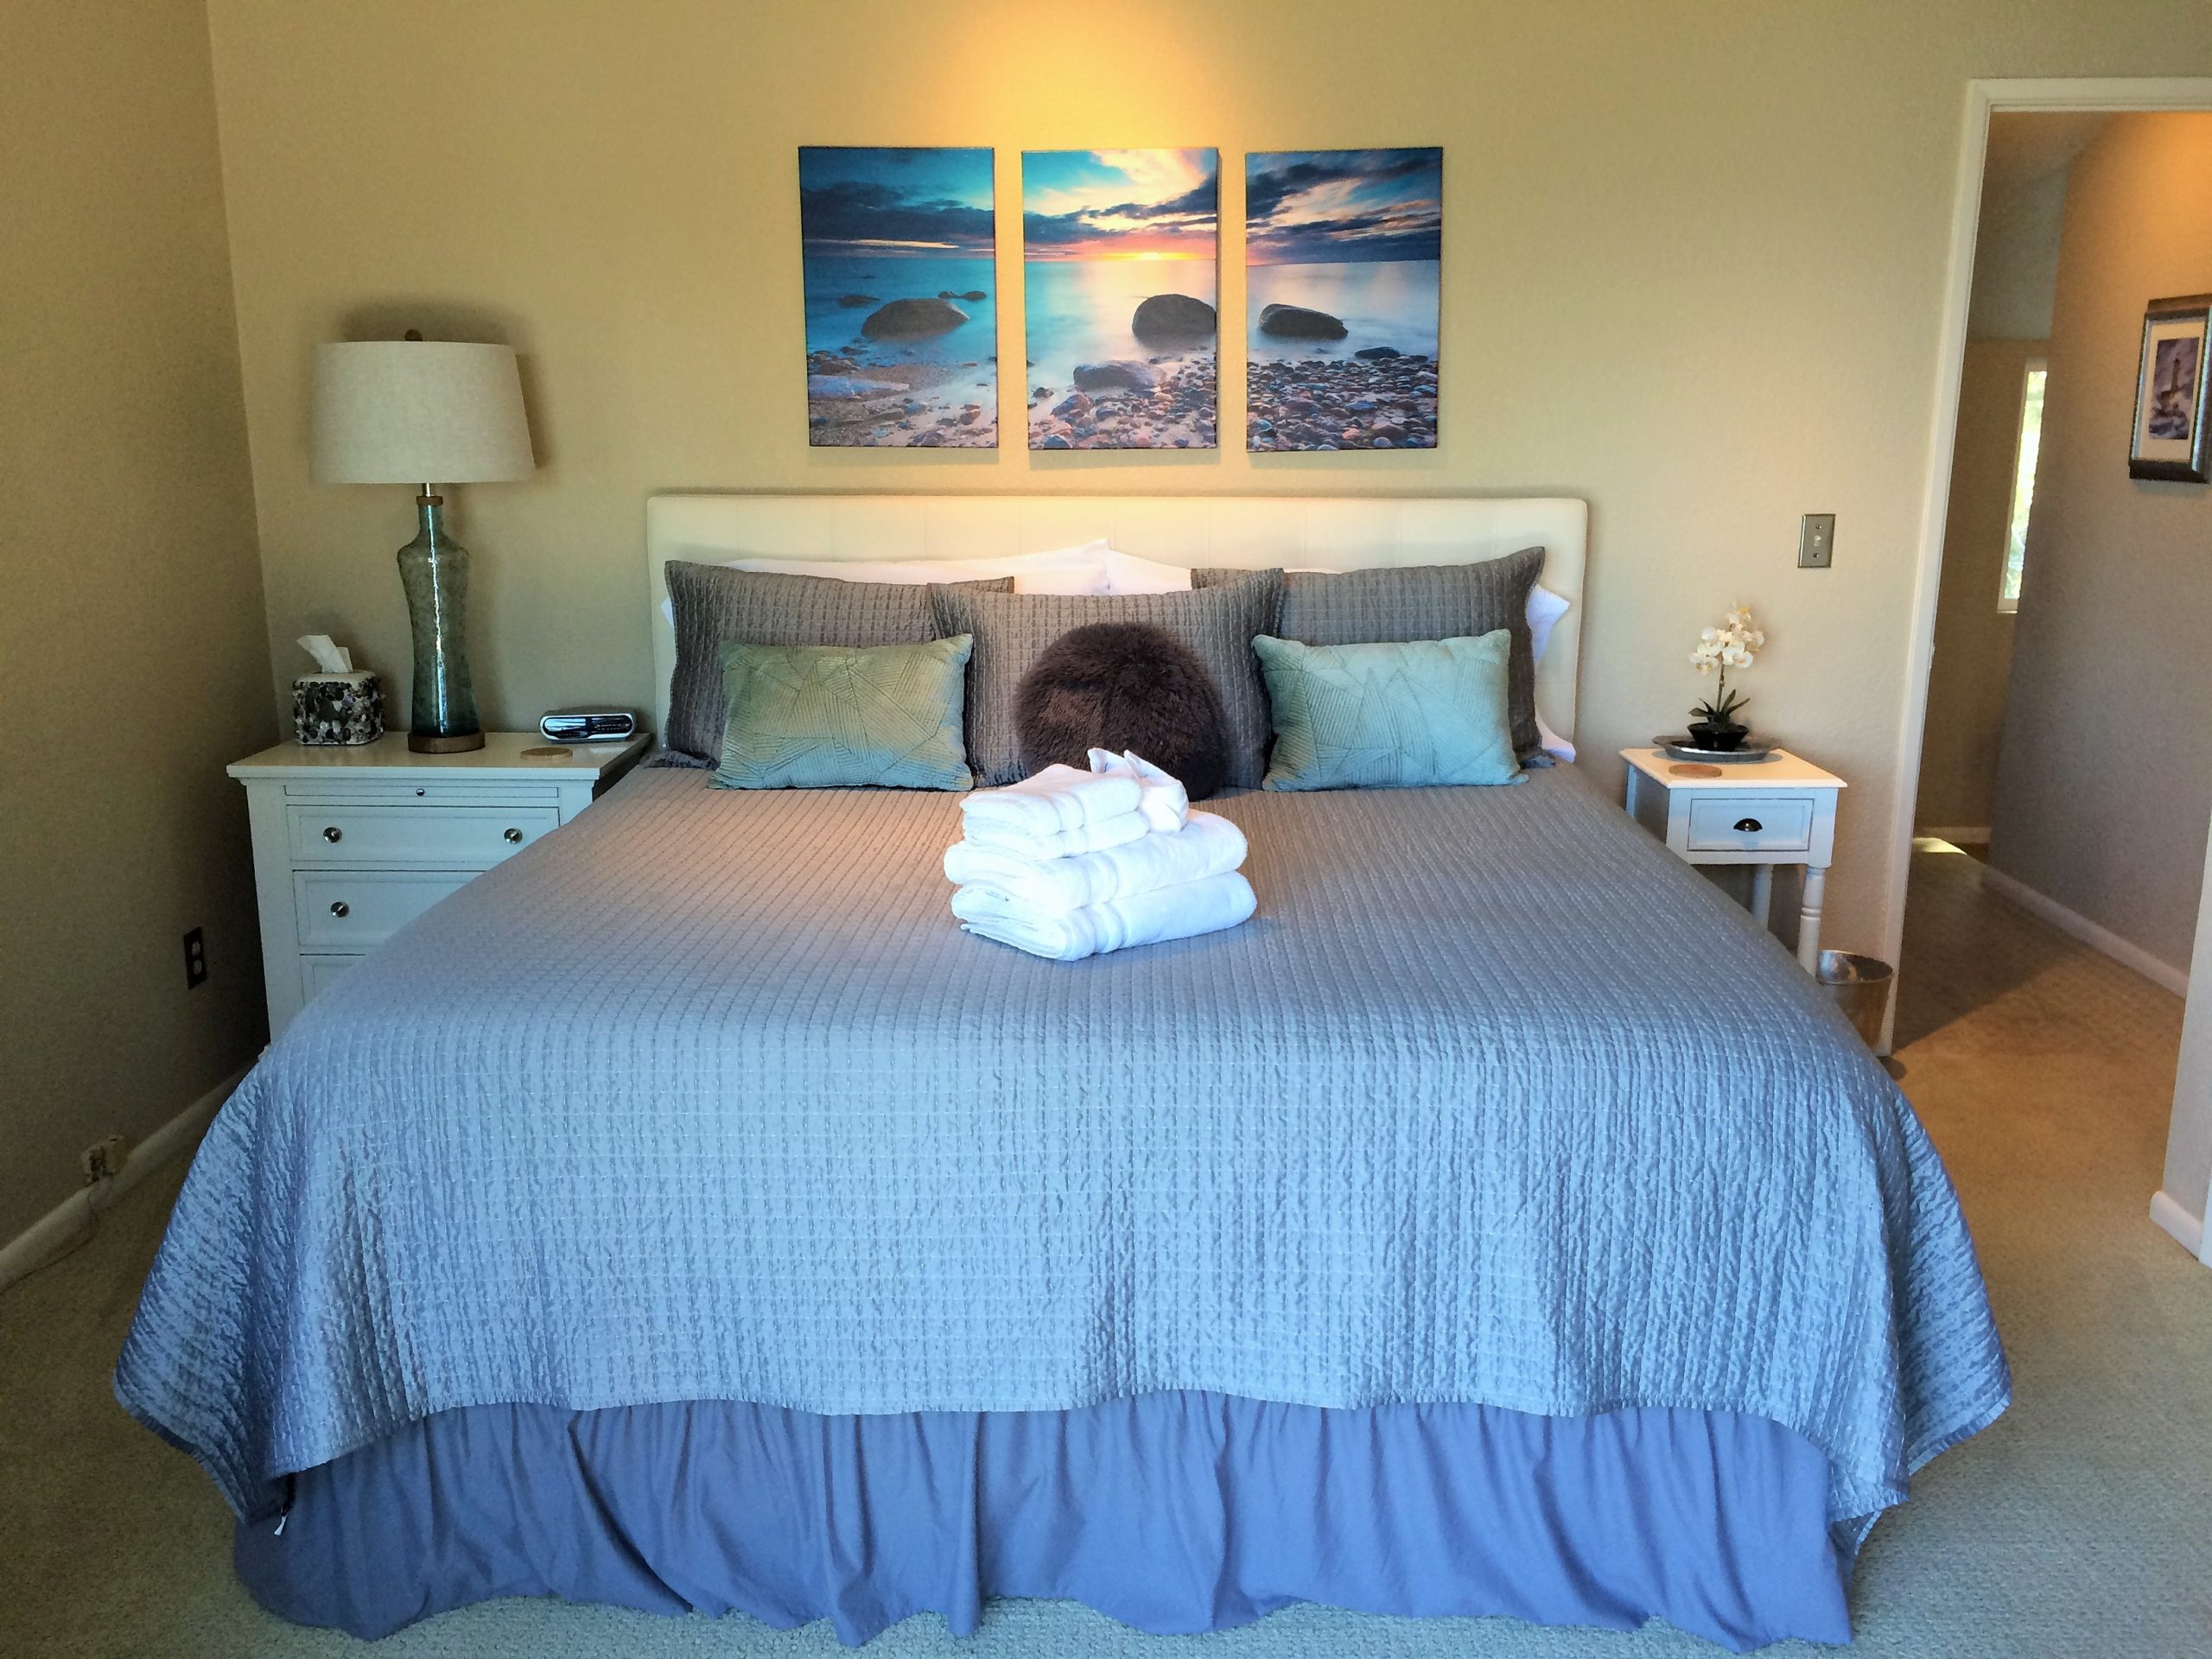 A bedroom at Pacific Edge with pleasant furnishings and ocean artwork